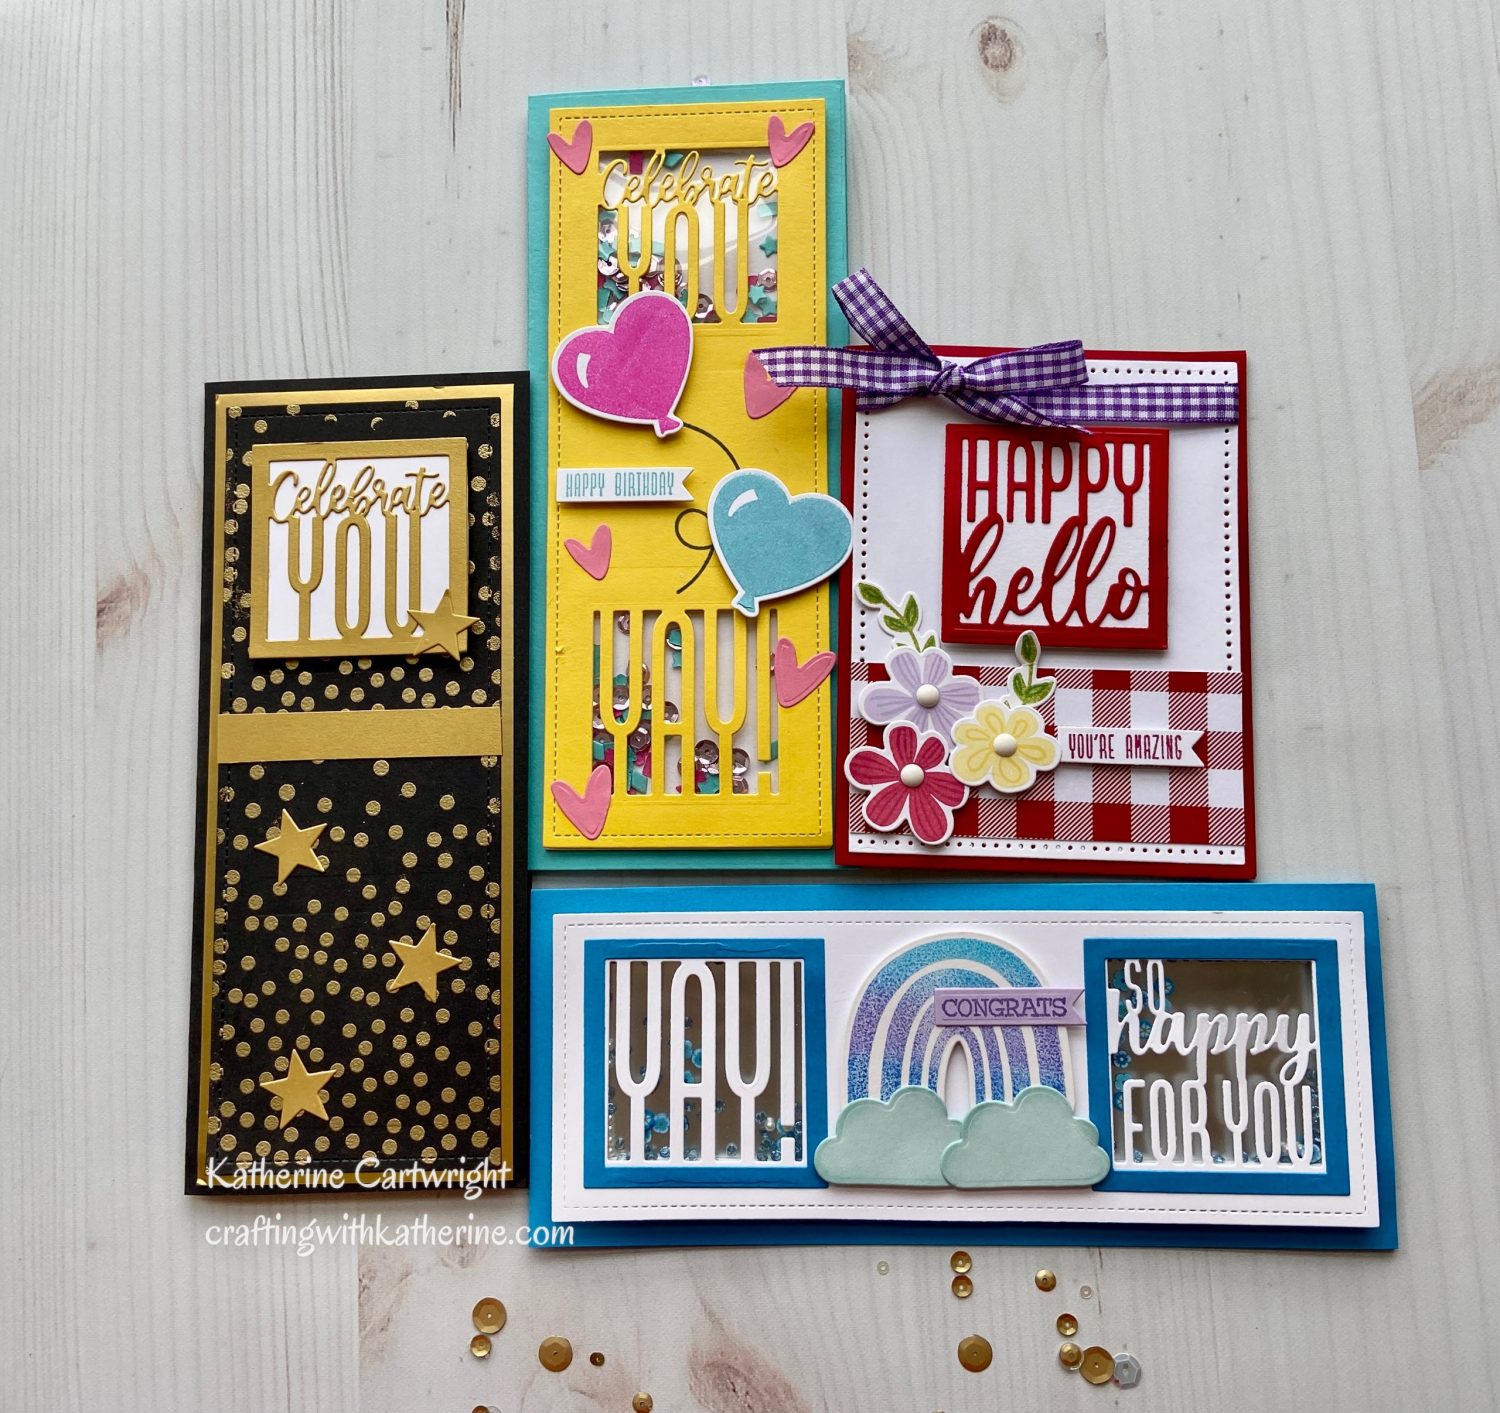 You are currently viewing 4 Cards – 1 Kit Diamond Press Slimline Shaker Kit Celebrate